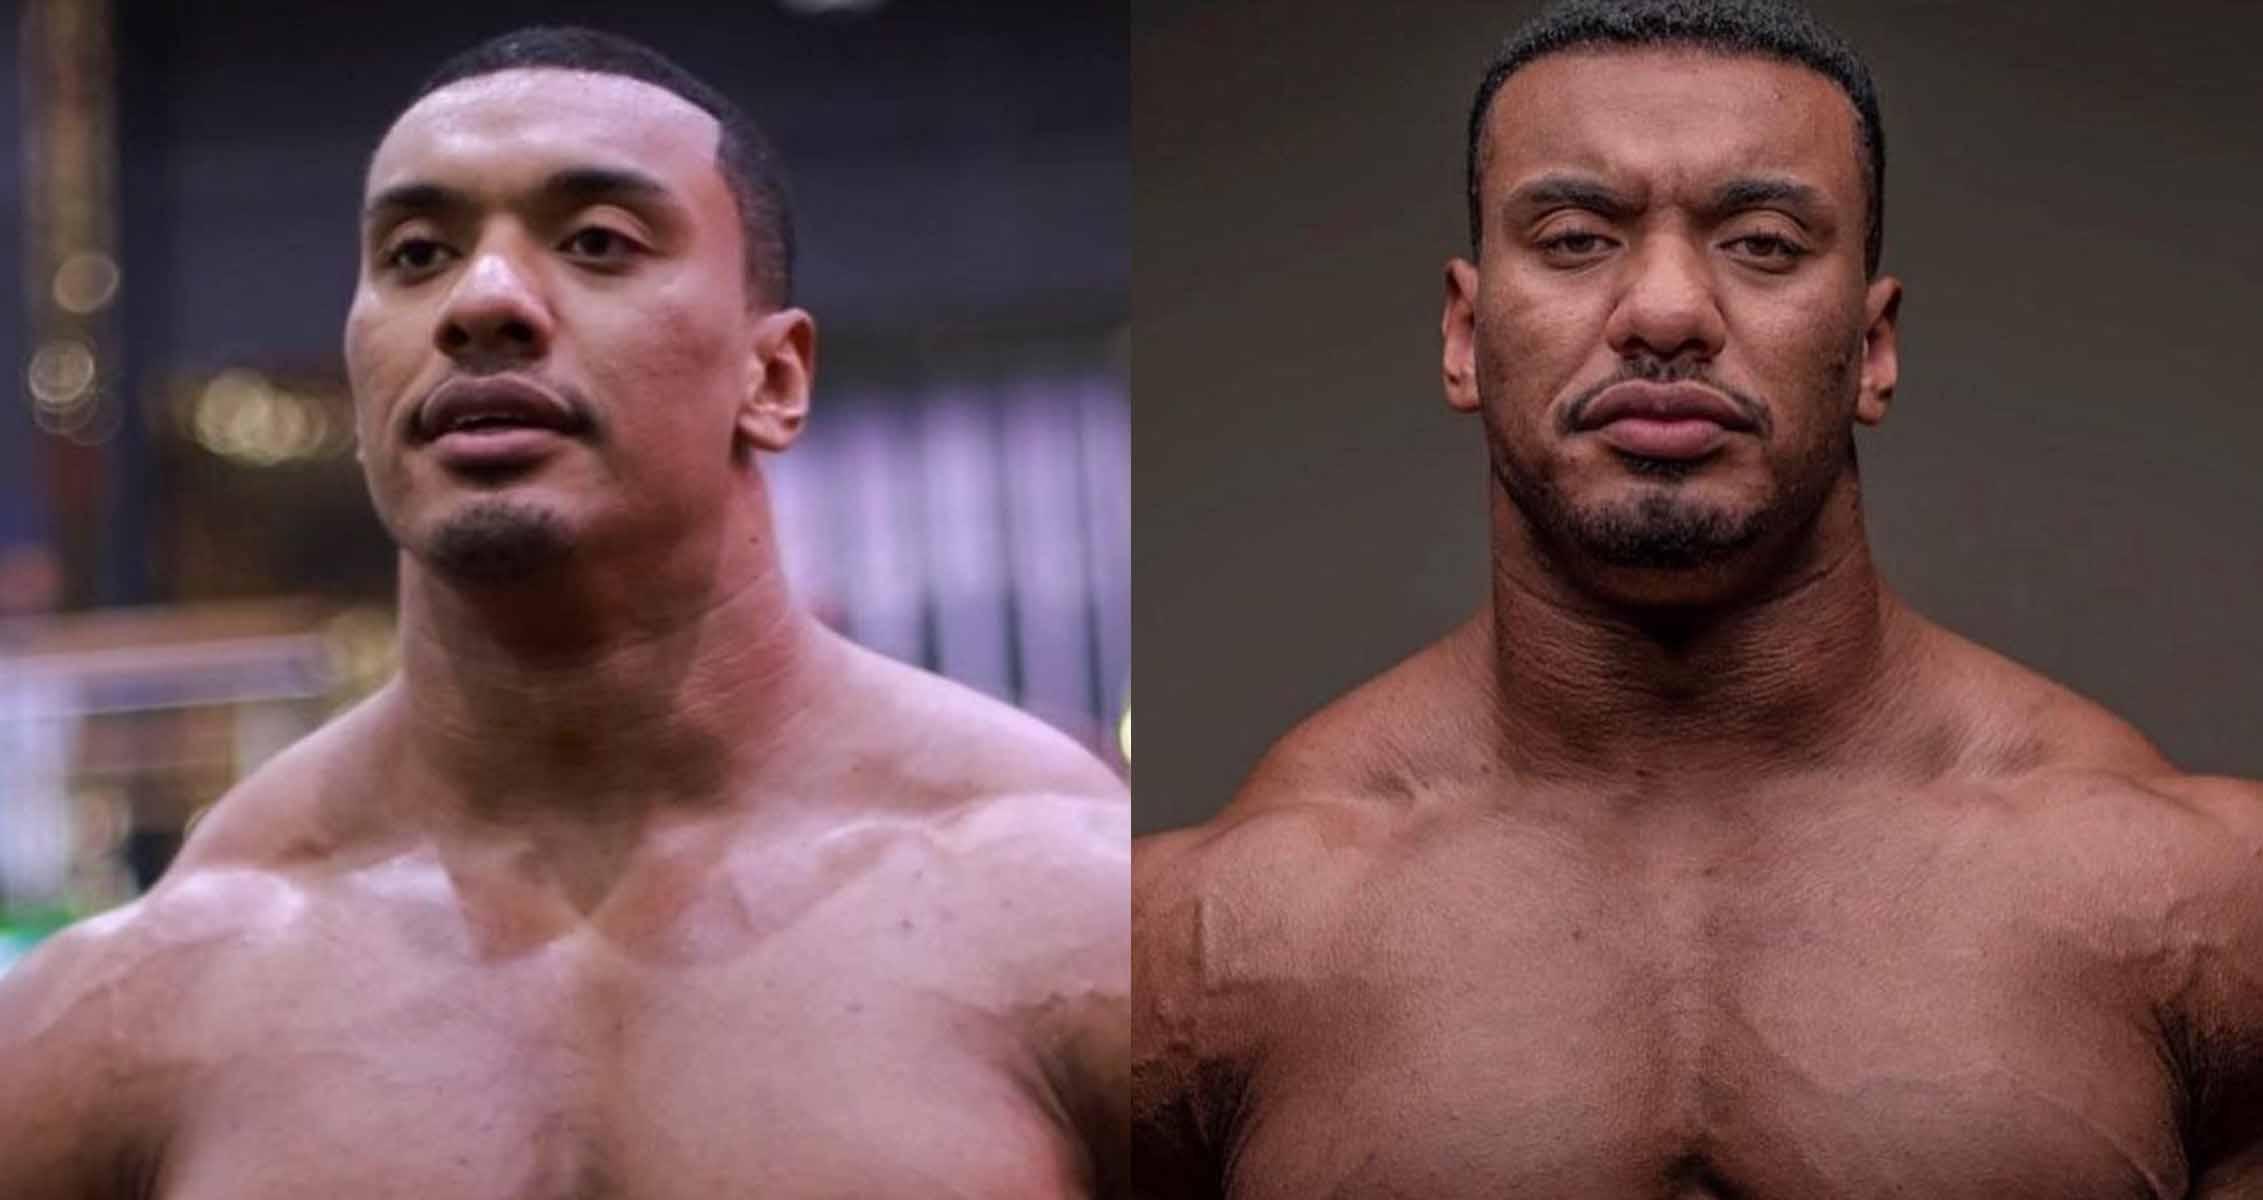 larry wheels before and after